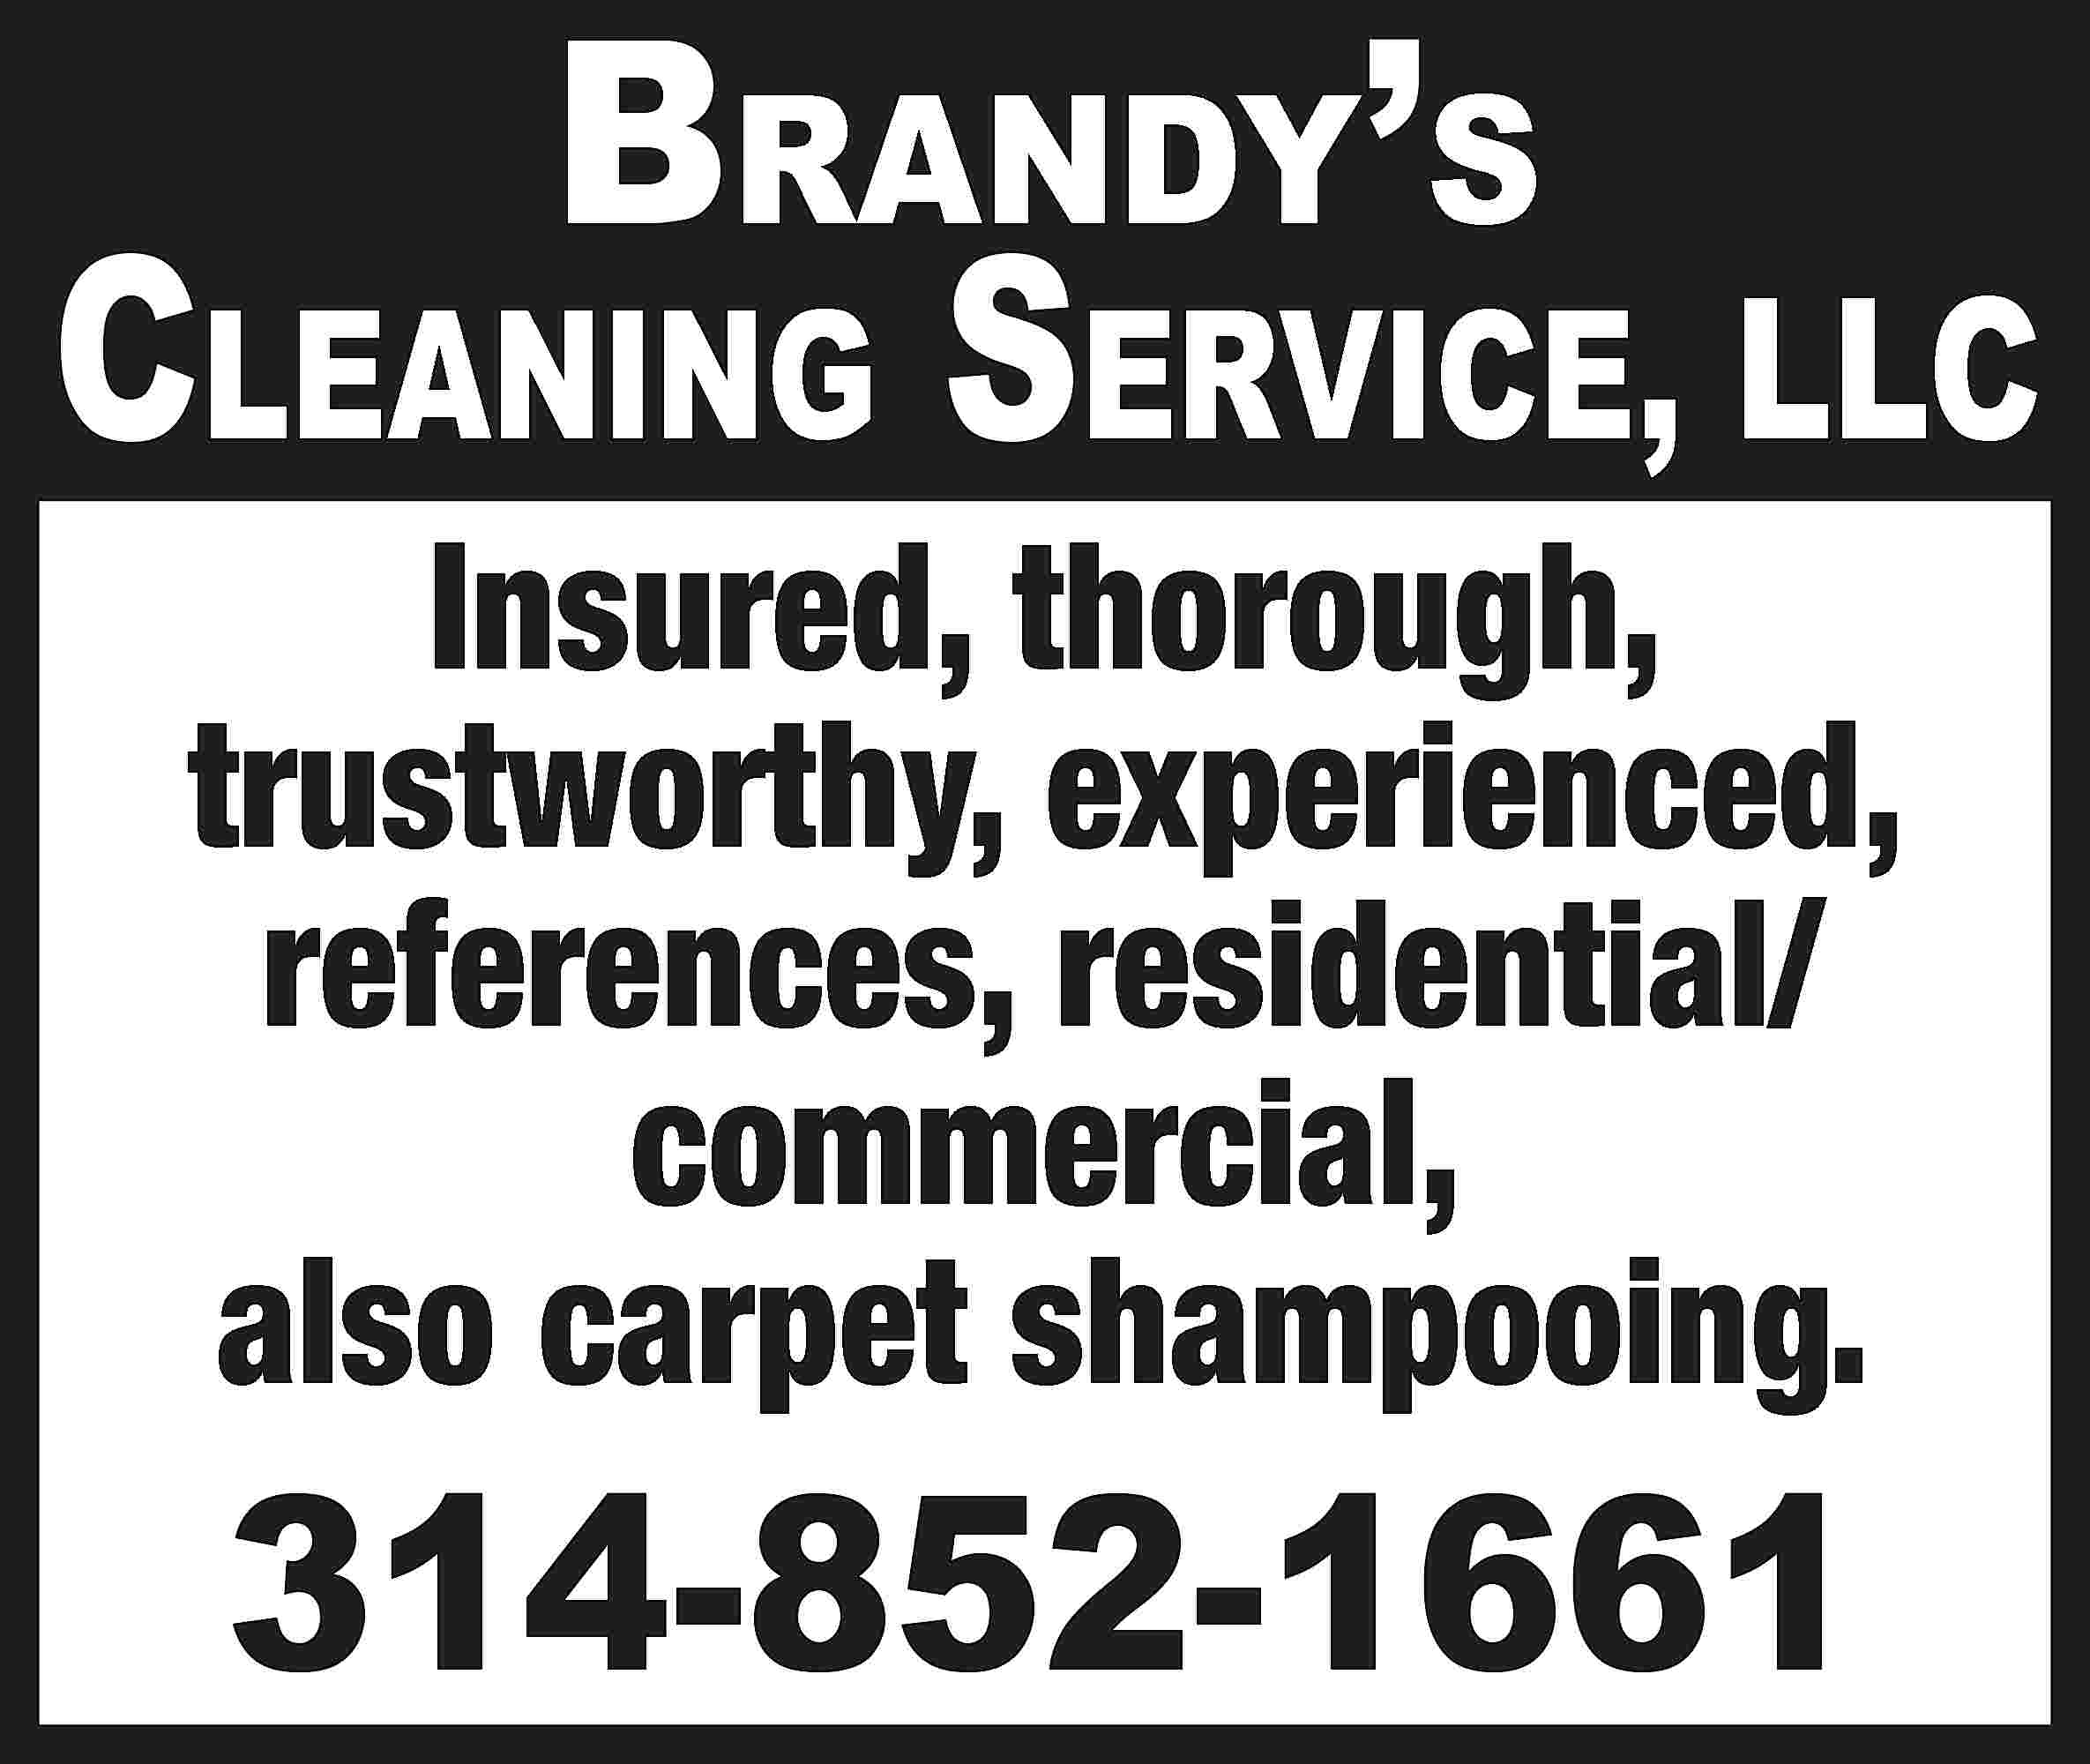 Brandy’s Cleaning Service, LLC Insured,  Brandy’s Cleaning Service, LLC Insured, thorough, trustworthy, experienced, references, residential/ commercial, also carpet shampooing. 314-852-1661